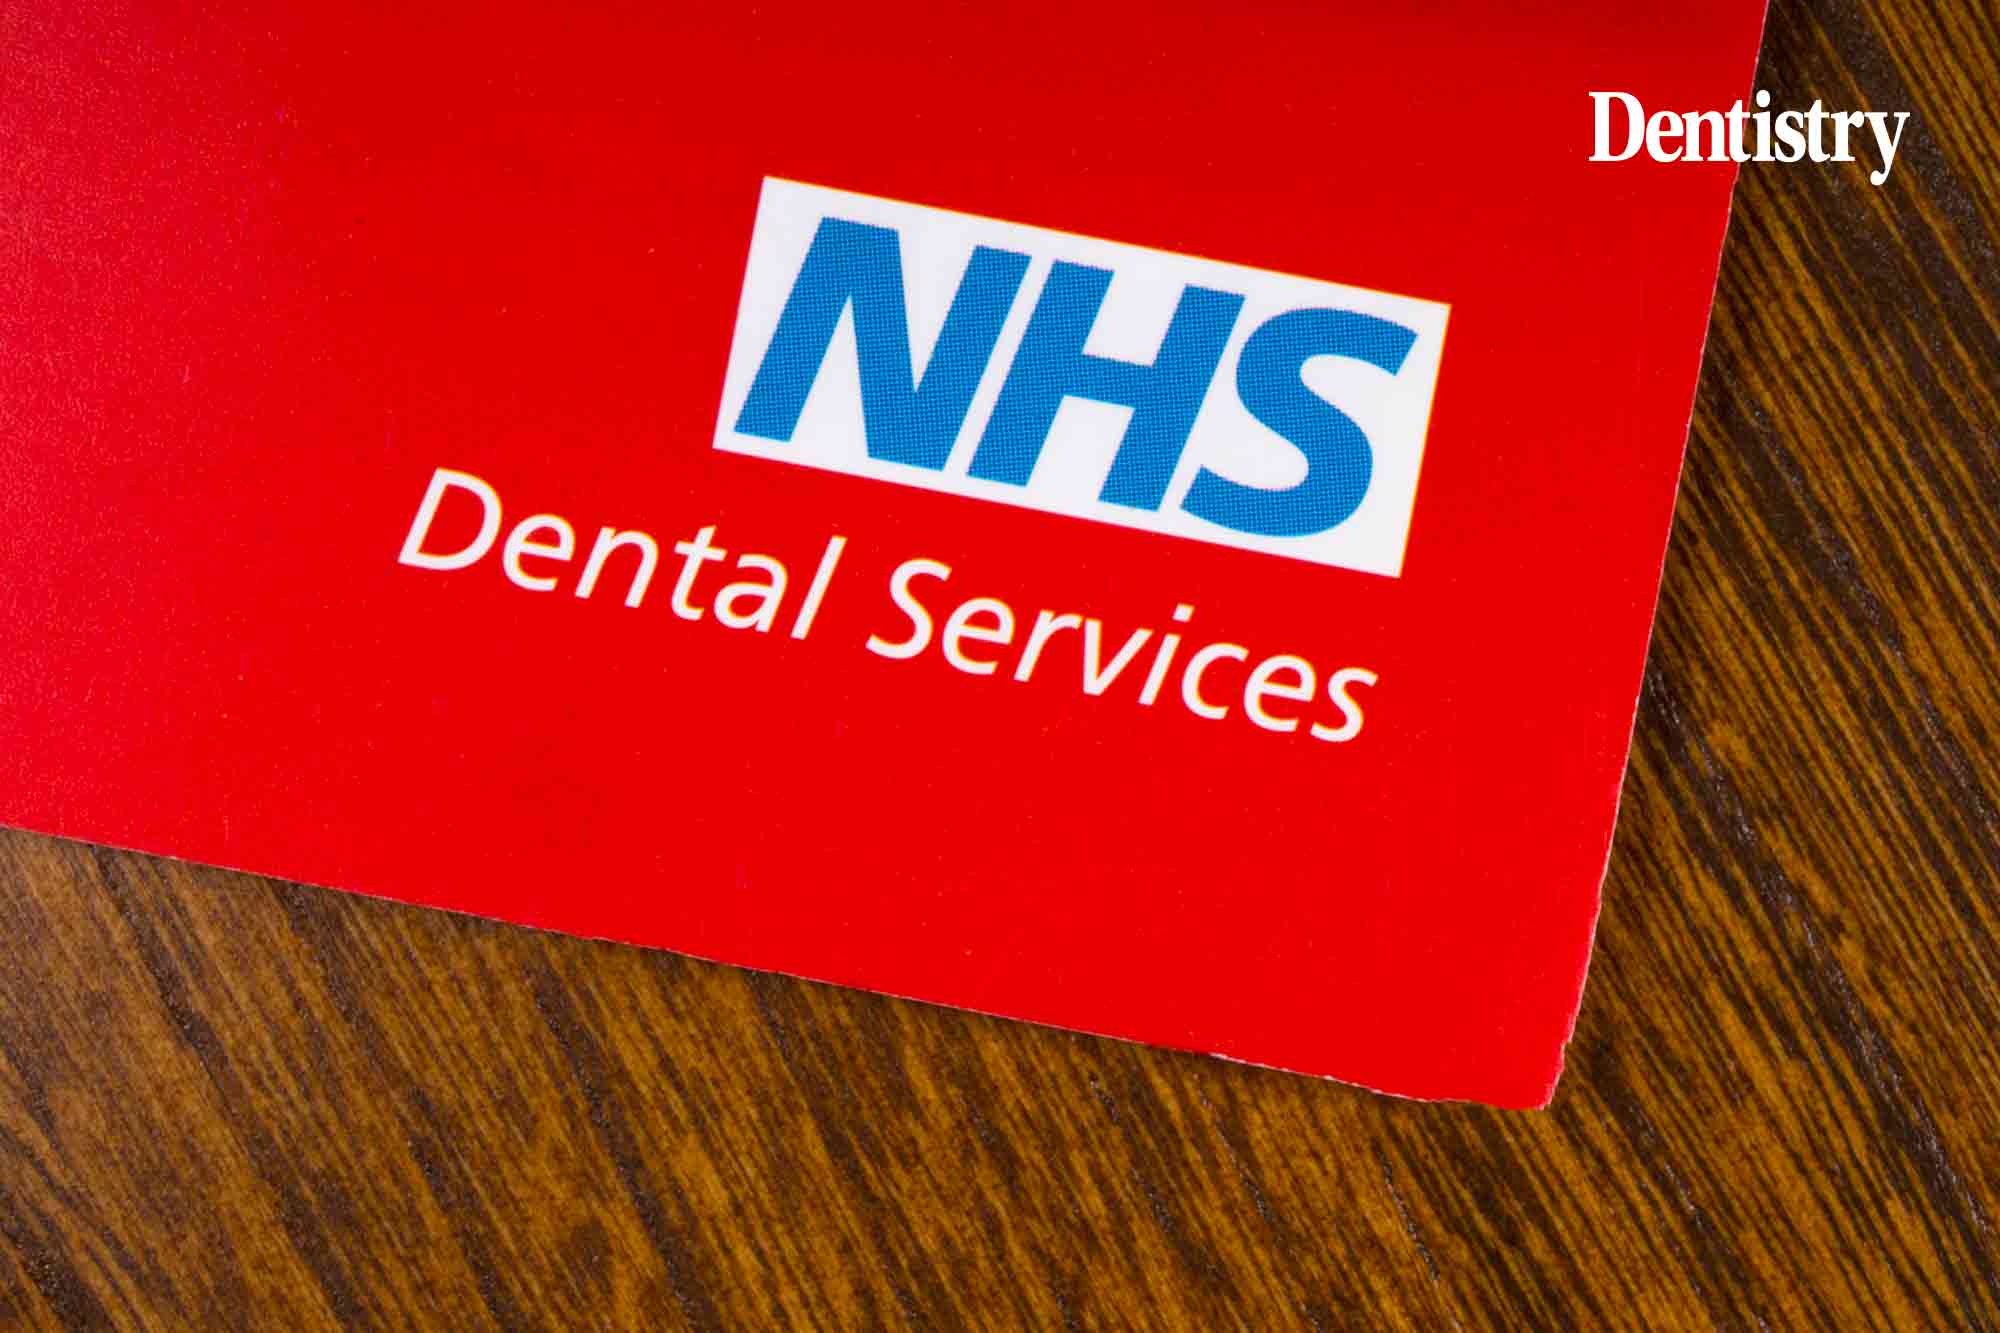 NHS dental recovery plan: is this the correct use of limited funding?